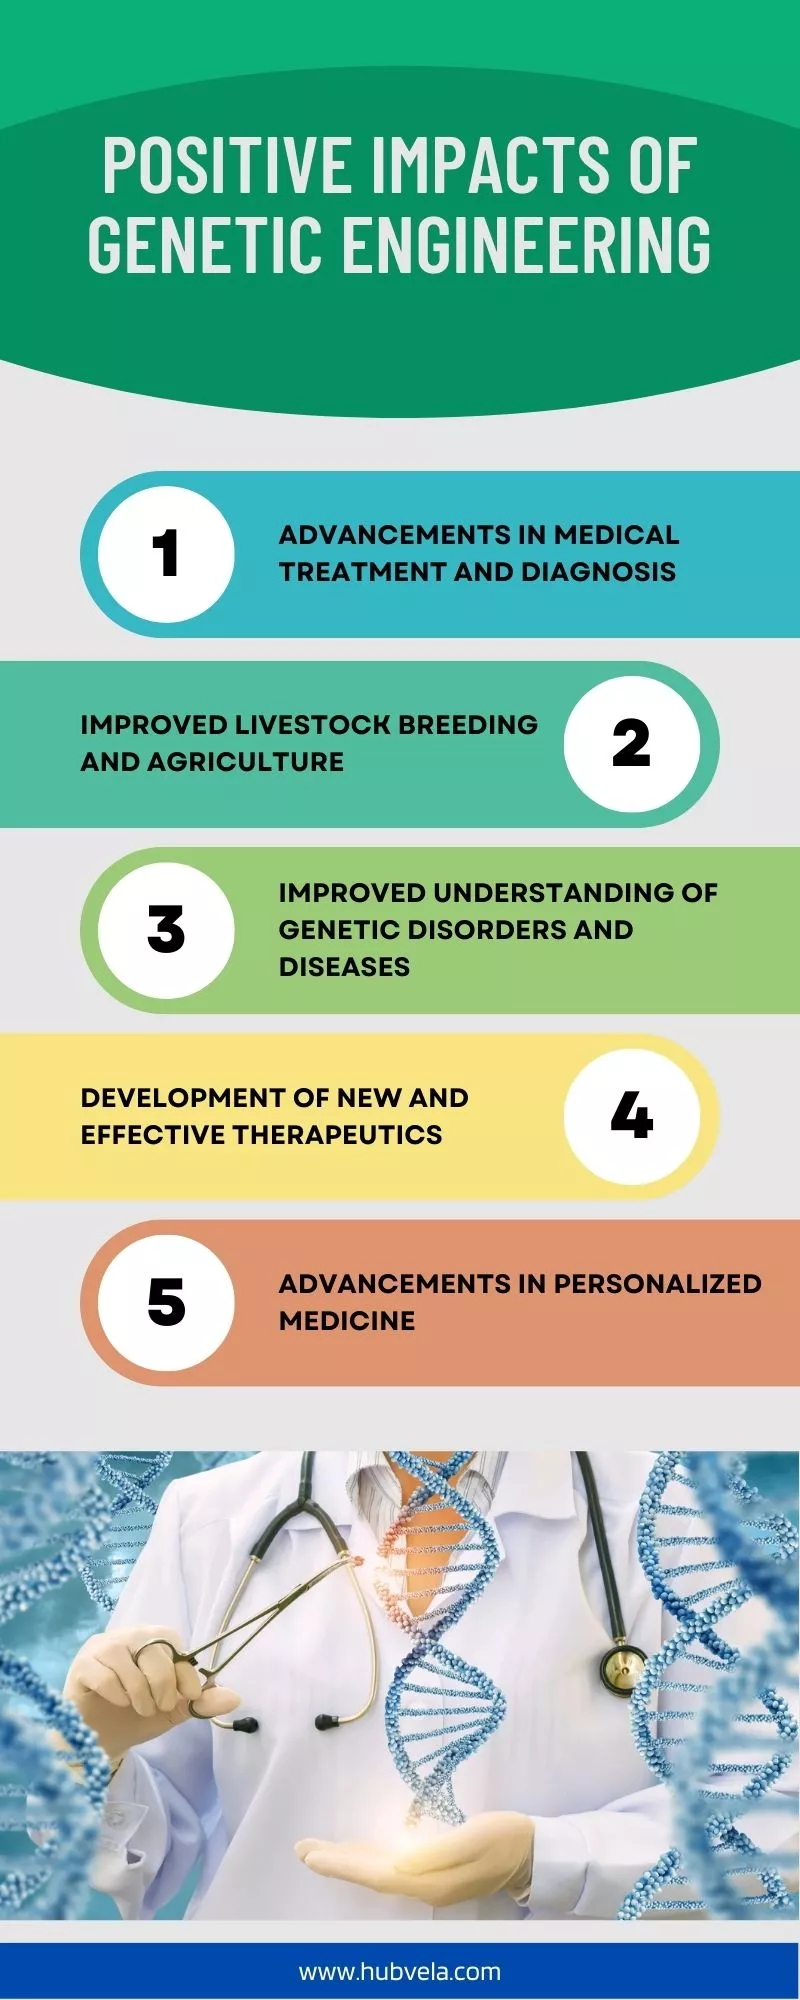 Positive Impacts of Genetic Engineering infographic